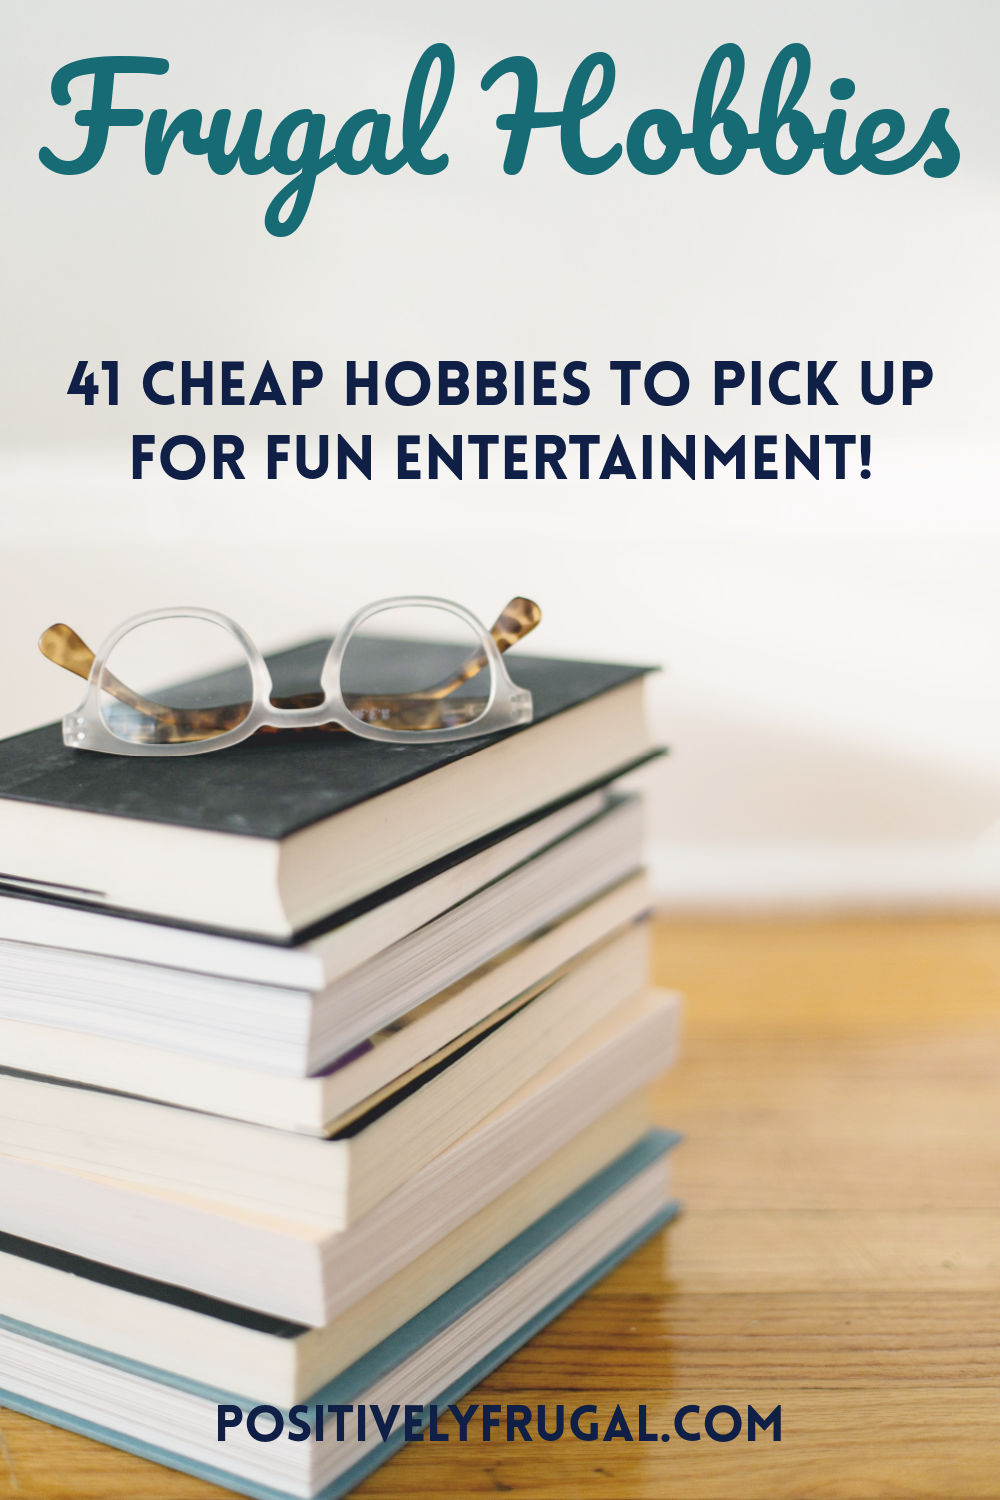 Cheap Hobbies to Pick Up by PositivelyFrugal.com